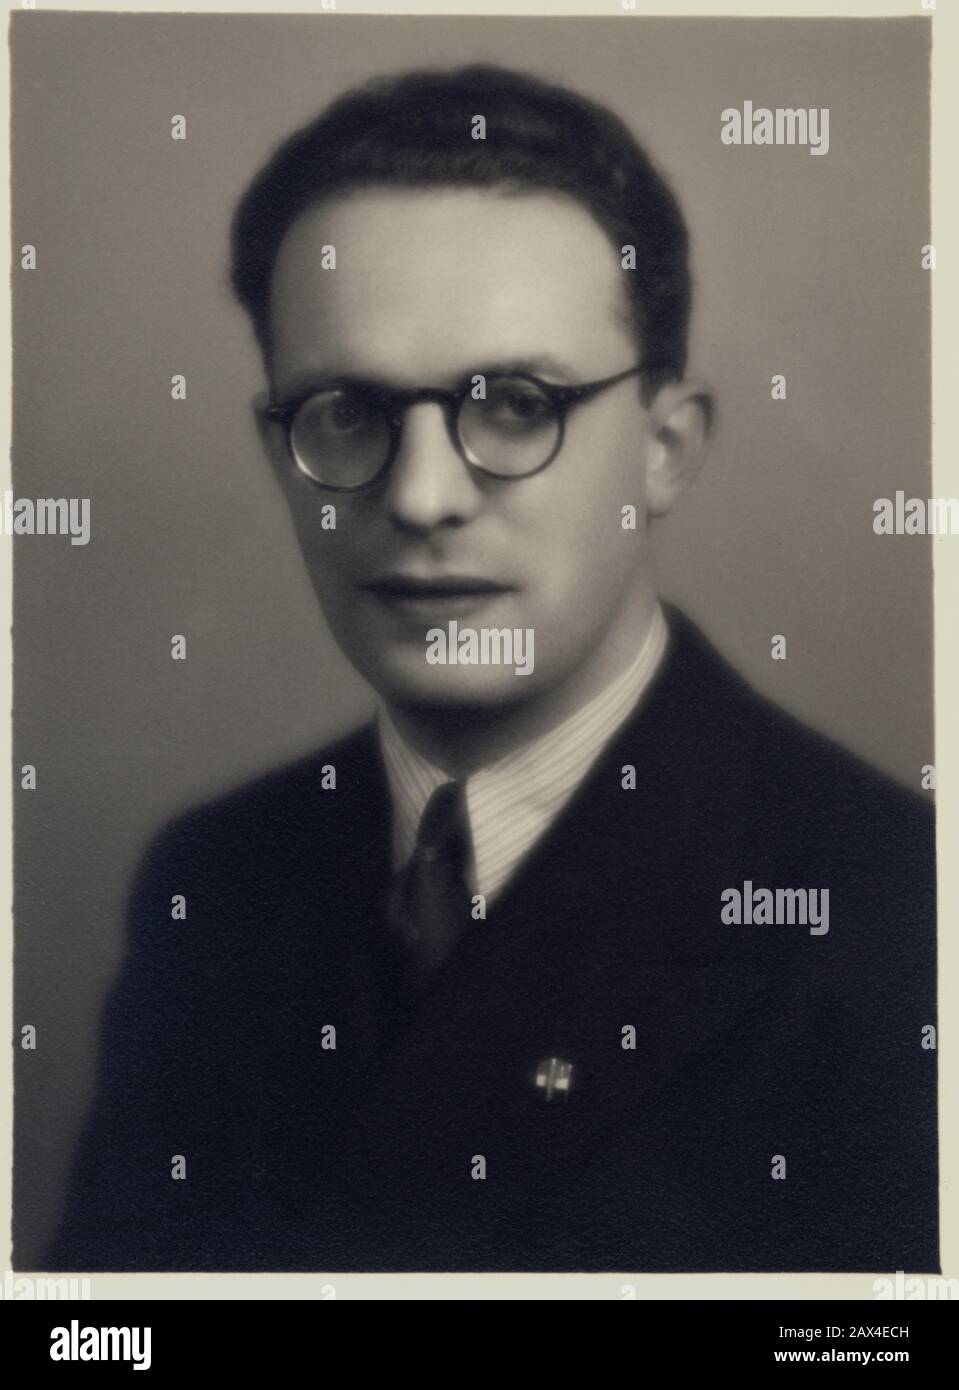 1939 ca, Parma , ITALY : The italian music composer , musicologist and  music teacher FEDERICO MOMPELLIO (  Genova 1908 - Domodossola 1989 ), with fascist badge of Partito Nazionale Fascista ( PNF ). Photo by Alberto Montacchini ( 1894 - 1956 ), Parma . Teacher and librarian at the conservatories of Palermo , Parma , Milan, since 1968 has been prof. in the univ. Parma (School of musical paleography). From 1949 he devoted himself to teaching History of Music at the Milano Conservatory - CONSERVATORIO MUSICALE DI MILANO - ARCHIVIO MUSICALE - ARCHIVISTA - BIBLIOTECA - BIBLIOTECARIO - MUSICOLOGO - Stock Photo